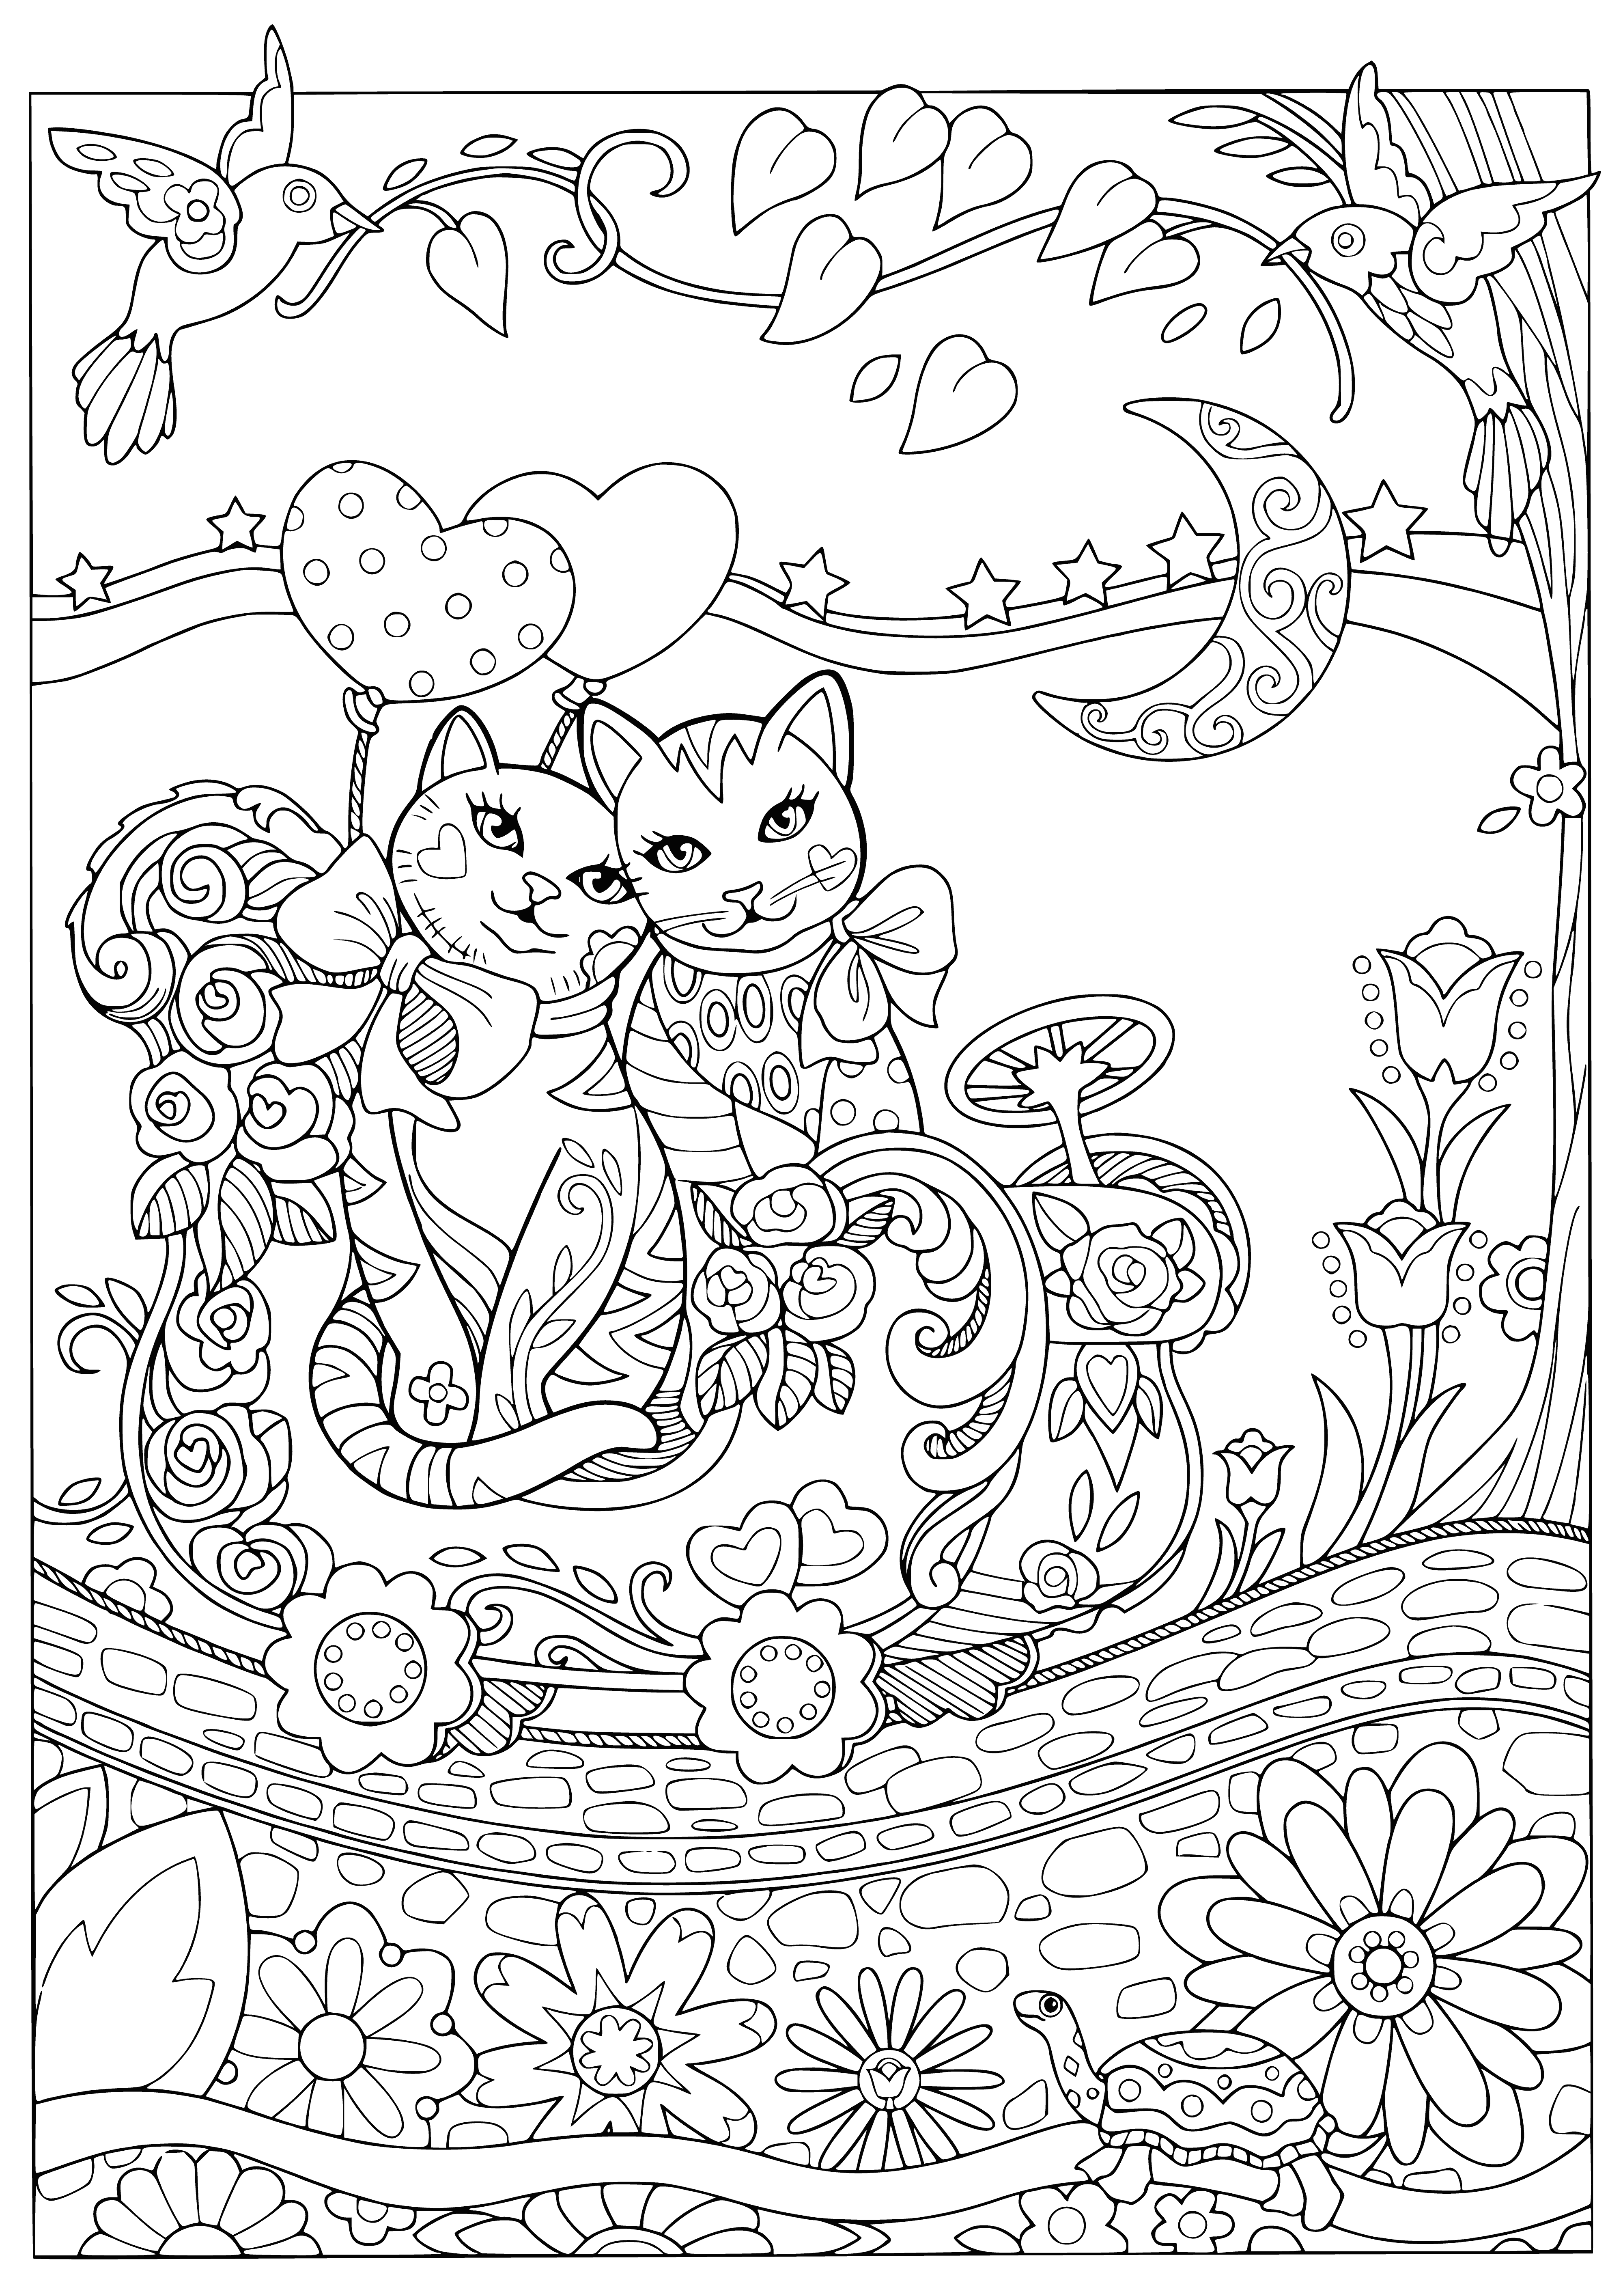 Cats for a walk coloring page